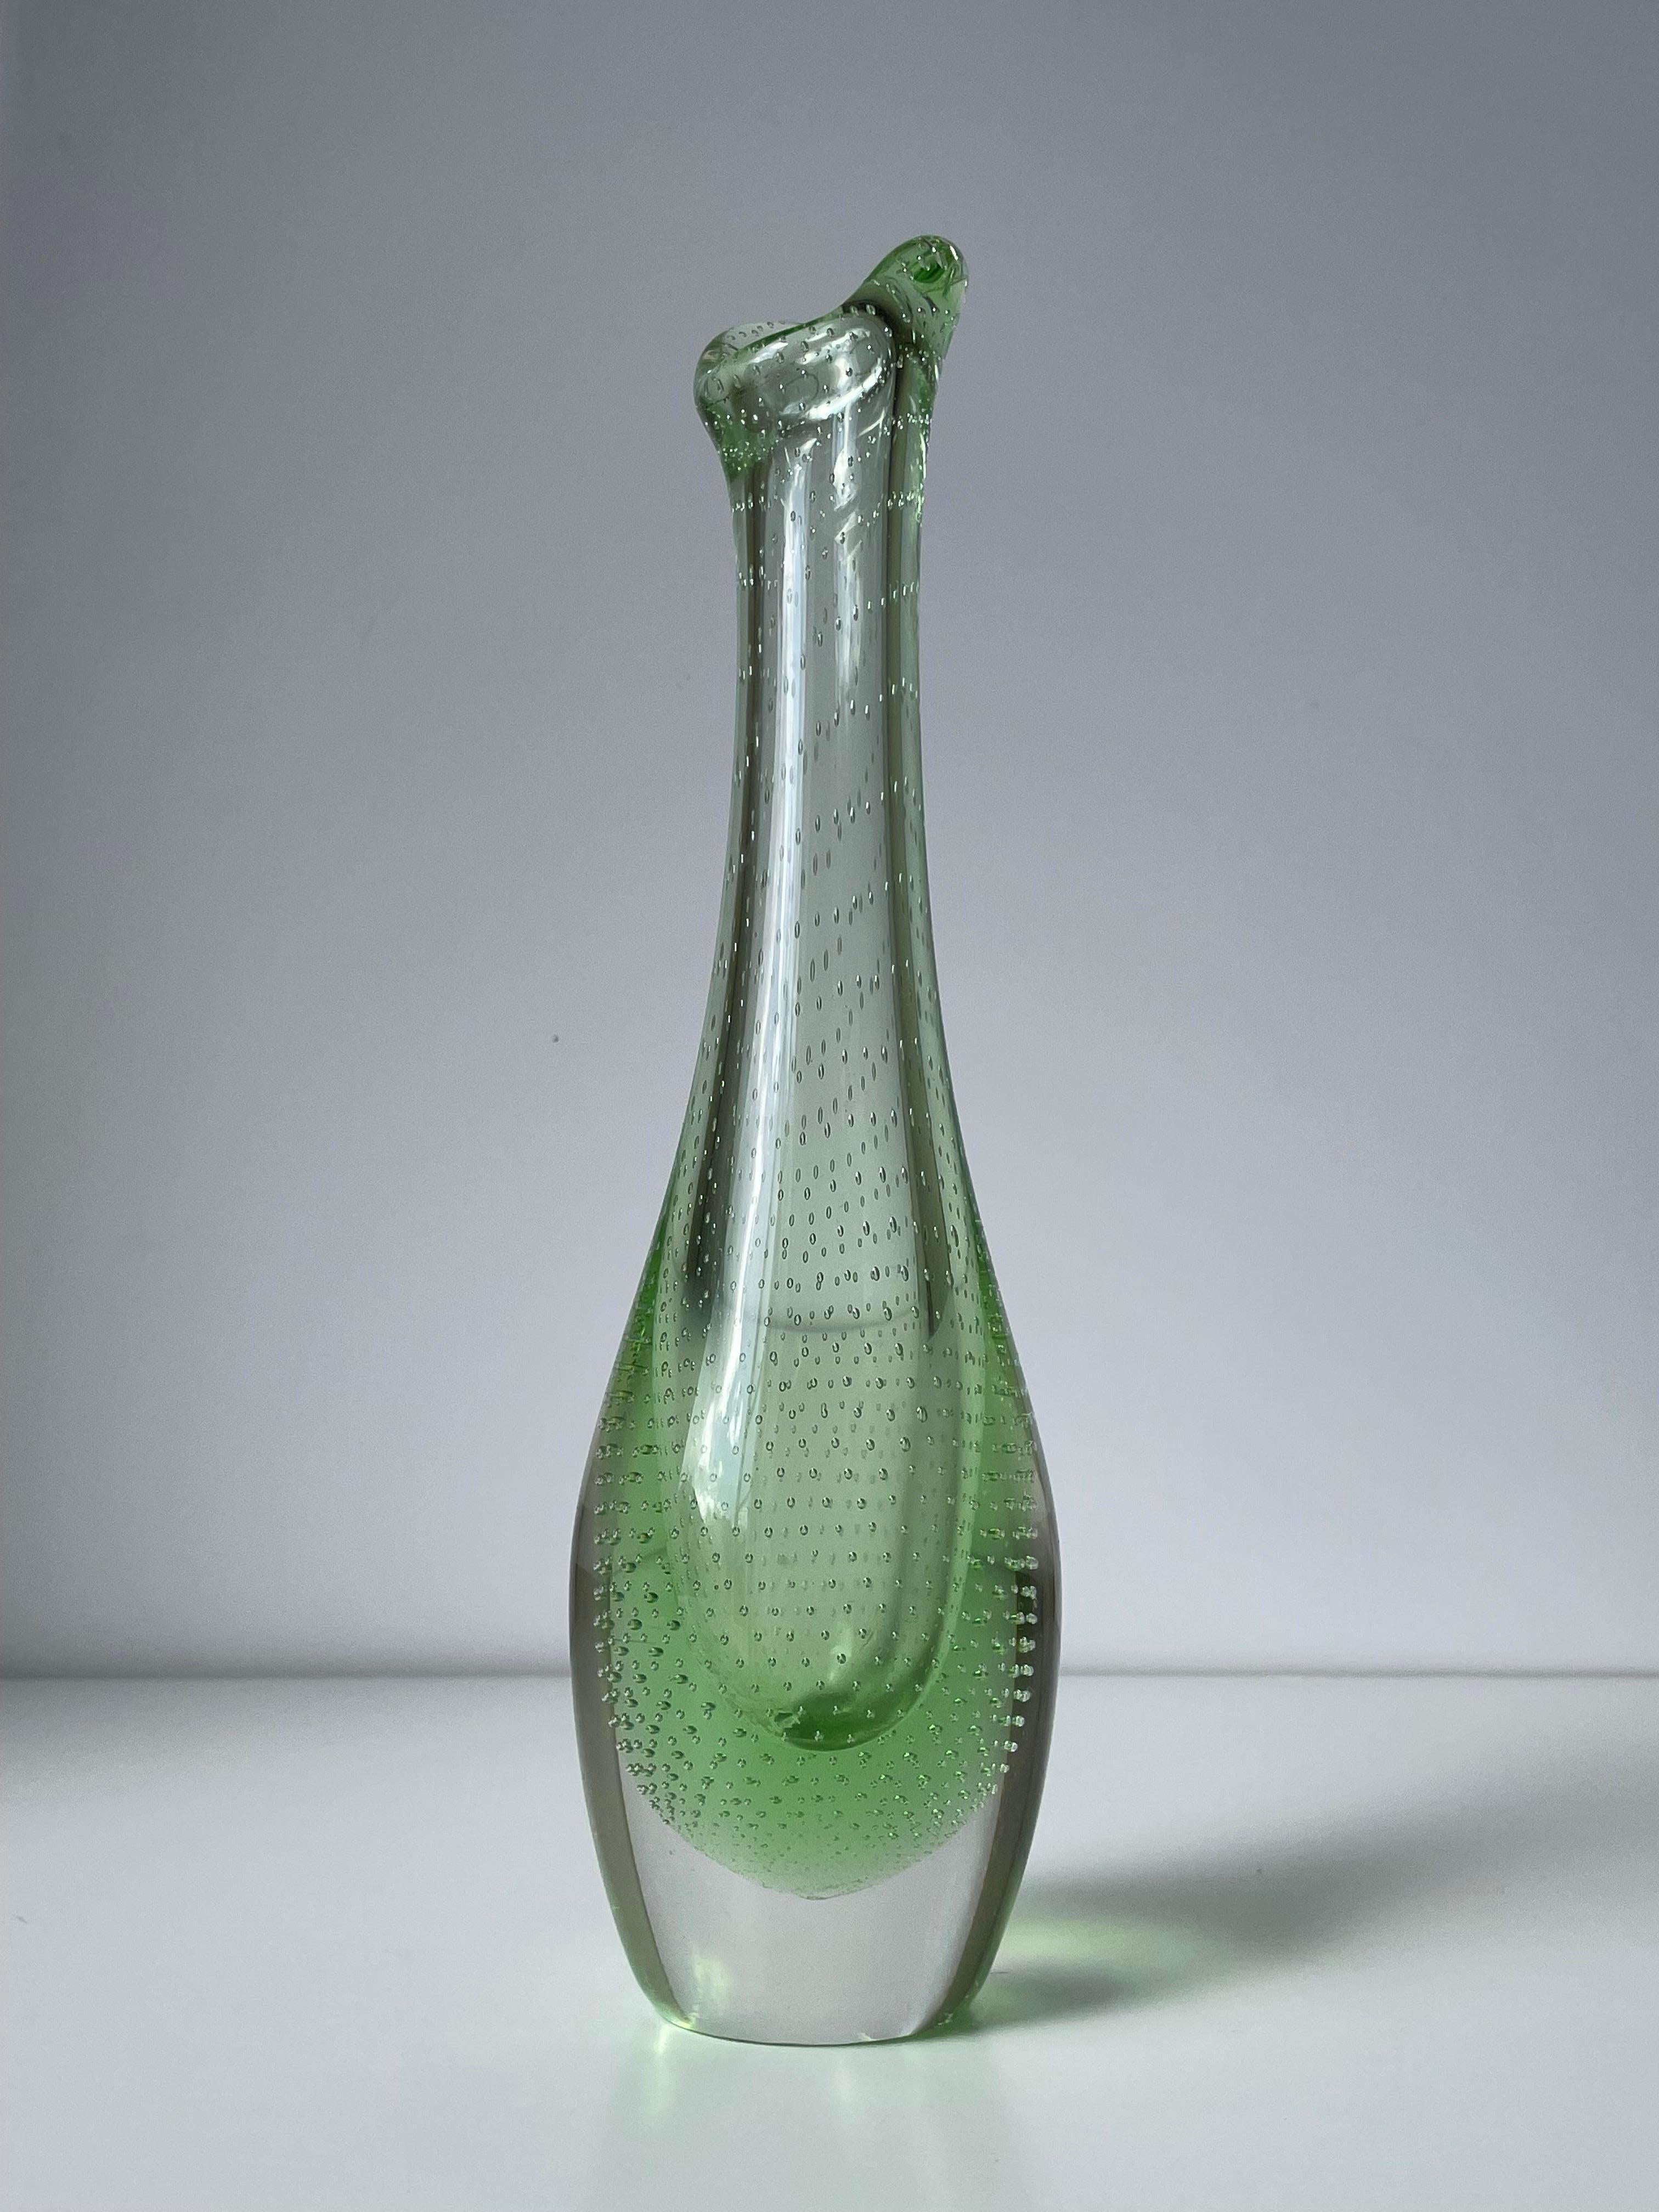 Tall green and heavy Scandinavian midcentury modern art glass vase. Green mouth blown bubble glass encased in clear glass as visible on the base. Heavy and soft rounded shape with a slender neck and asymmetrical top. Manufactured by Flygsfors